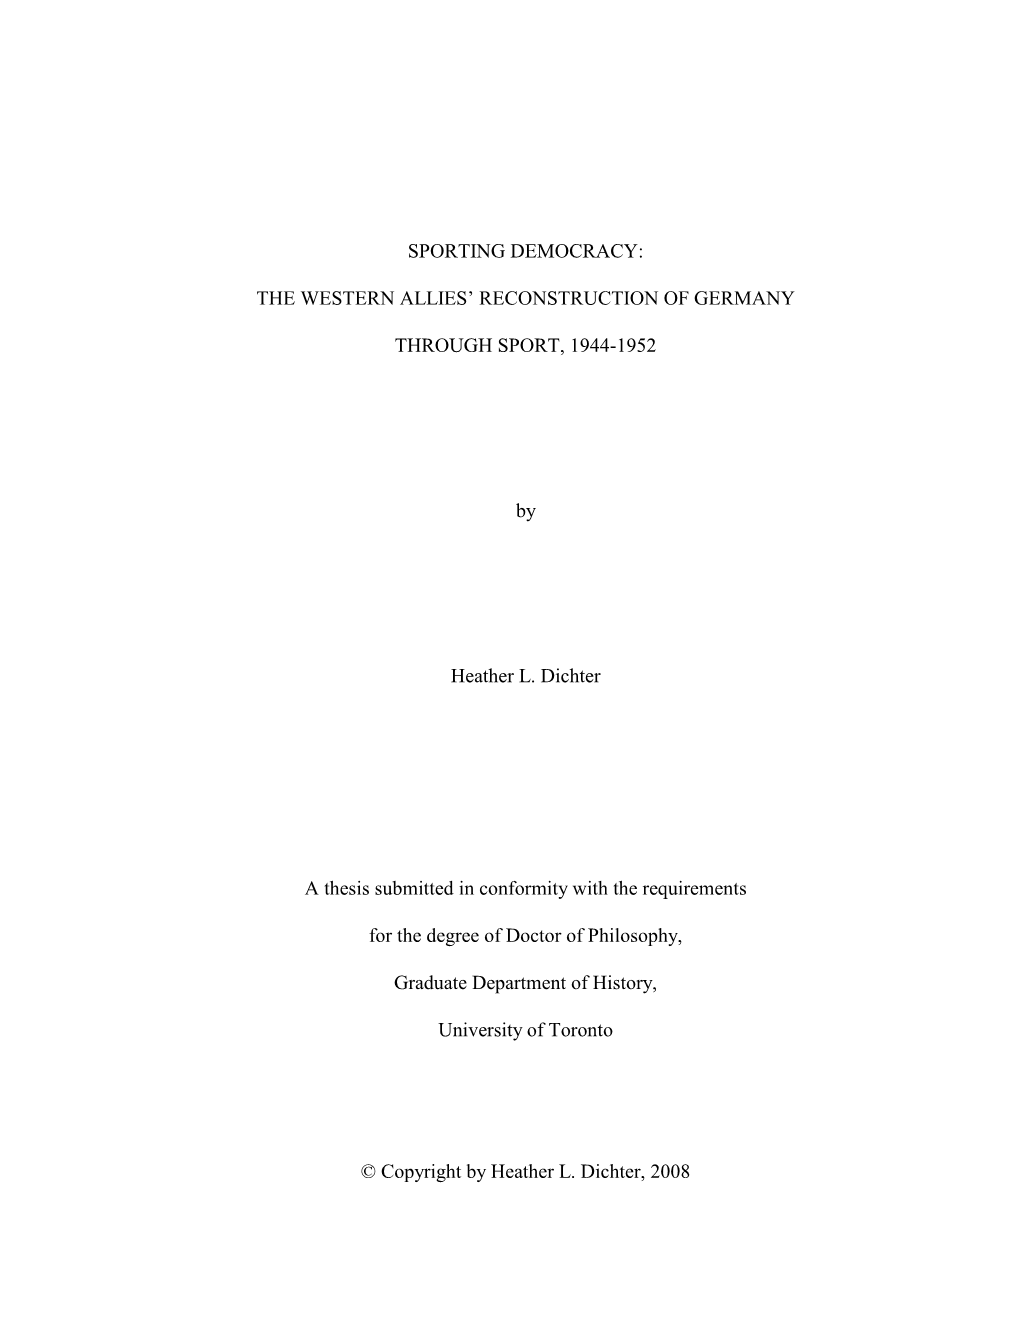 THE WESTERN ALLIES' RECONSTRUCTION of GERMANY THROUGH SPORT, 1944-1952 by Heather L. Dichter a Thesis Subm